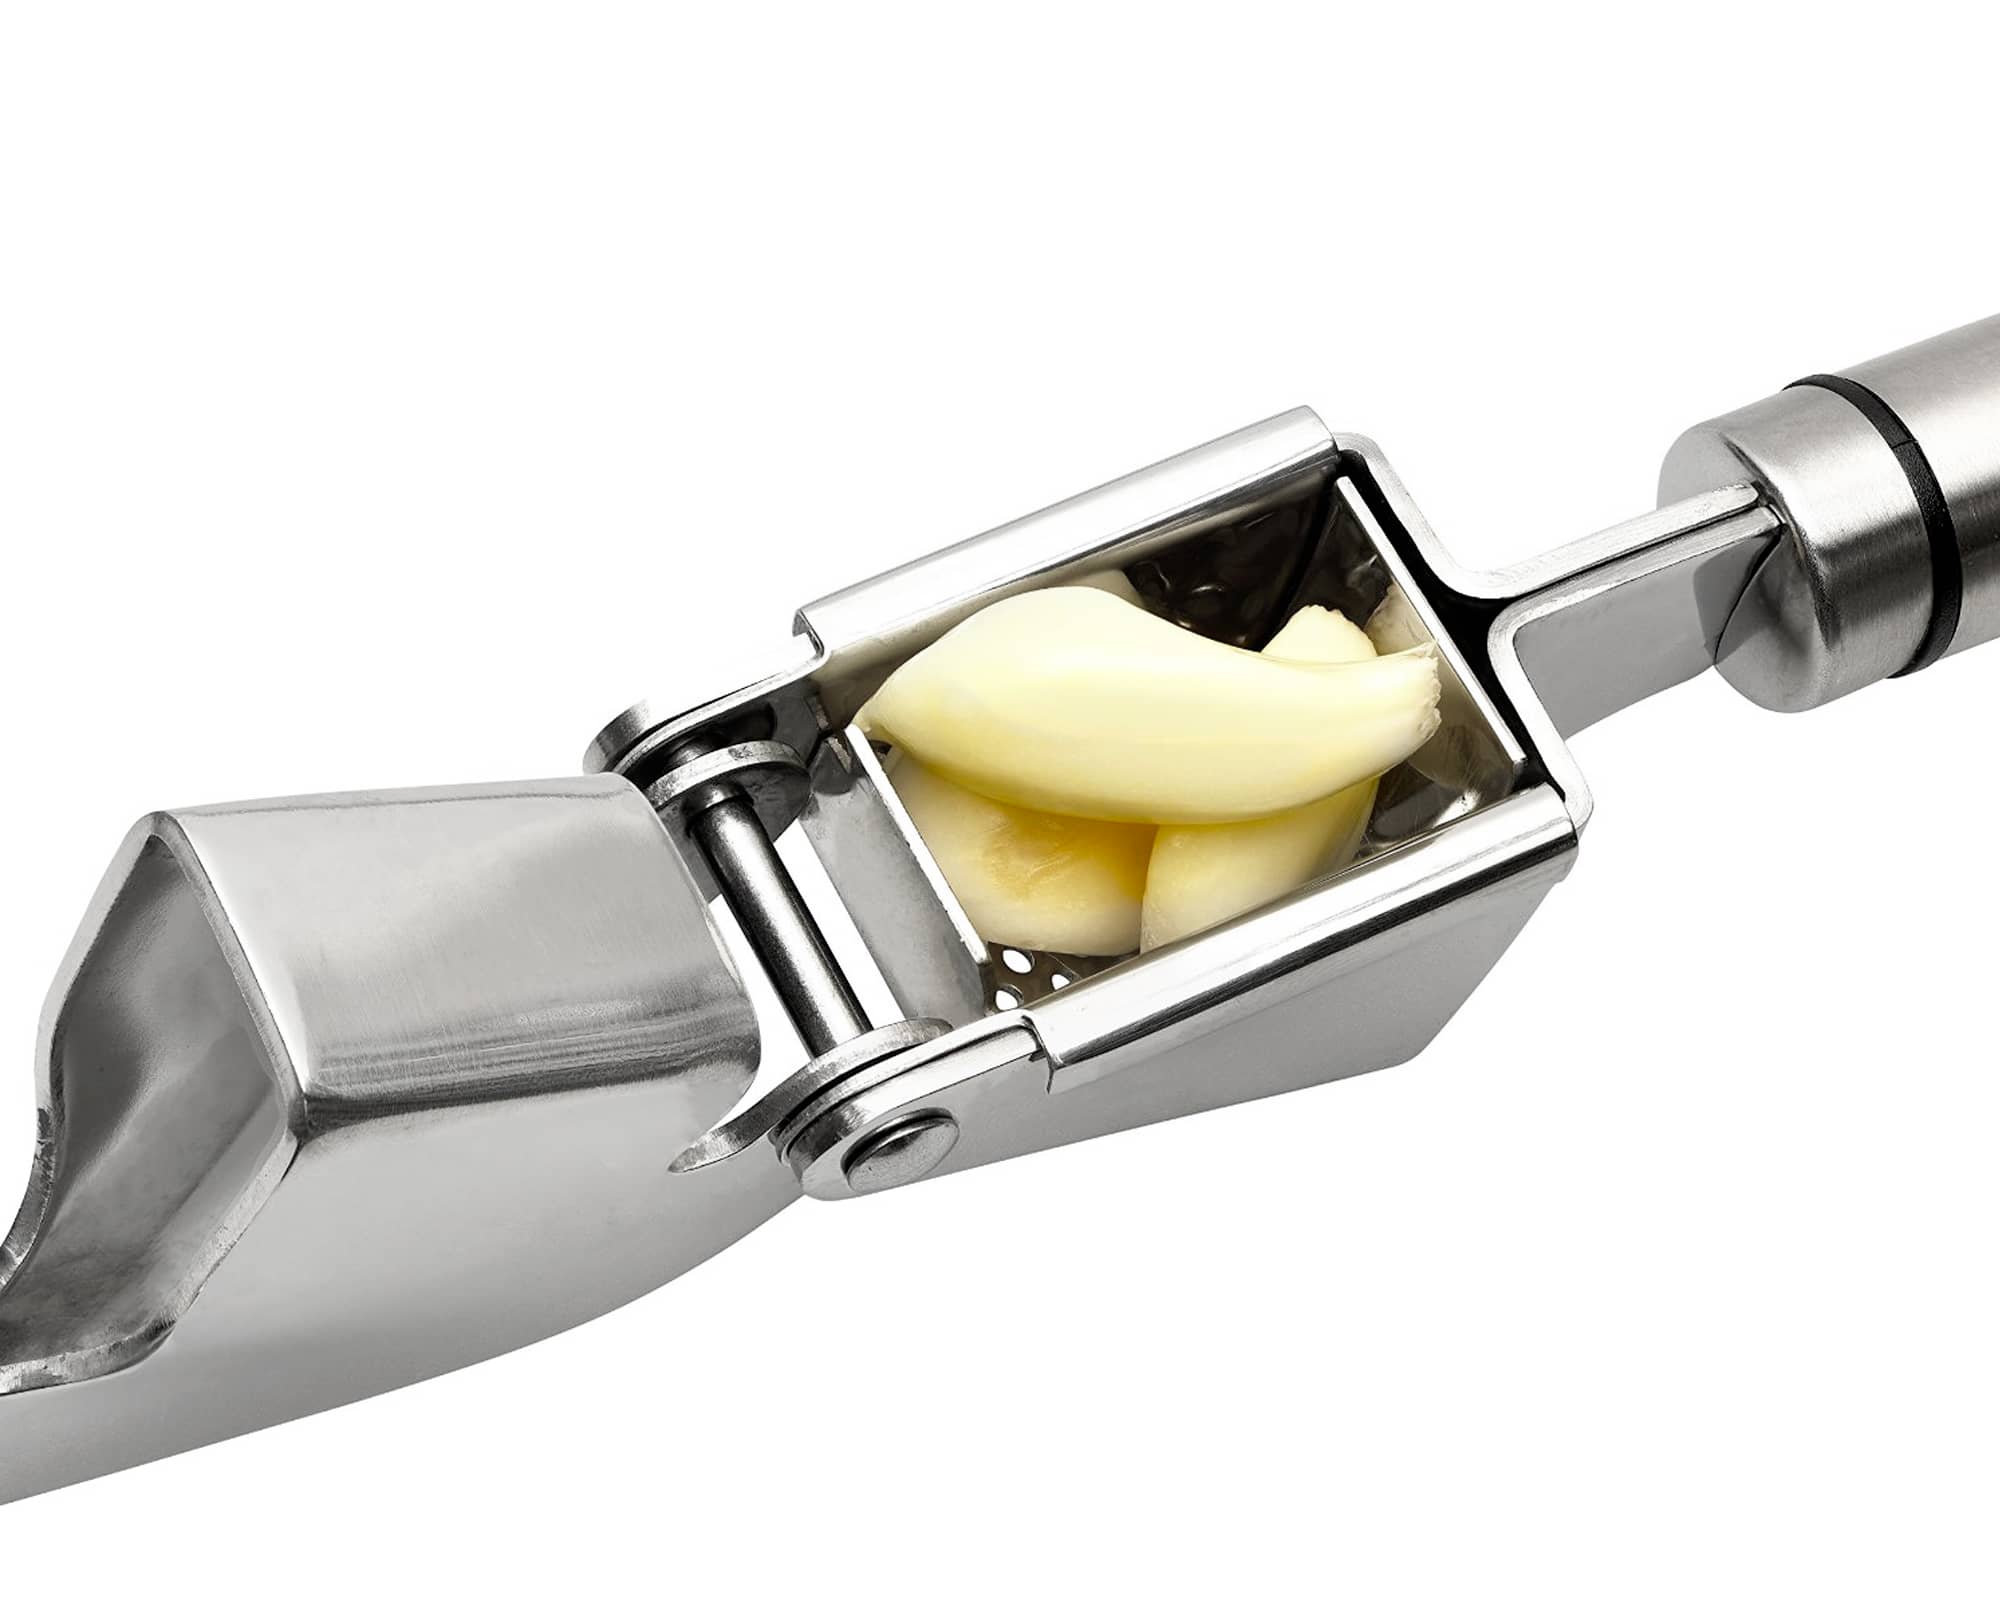 Close view of Garlic inside the large chamber of Benchusch Professional Garlic Press